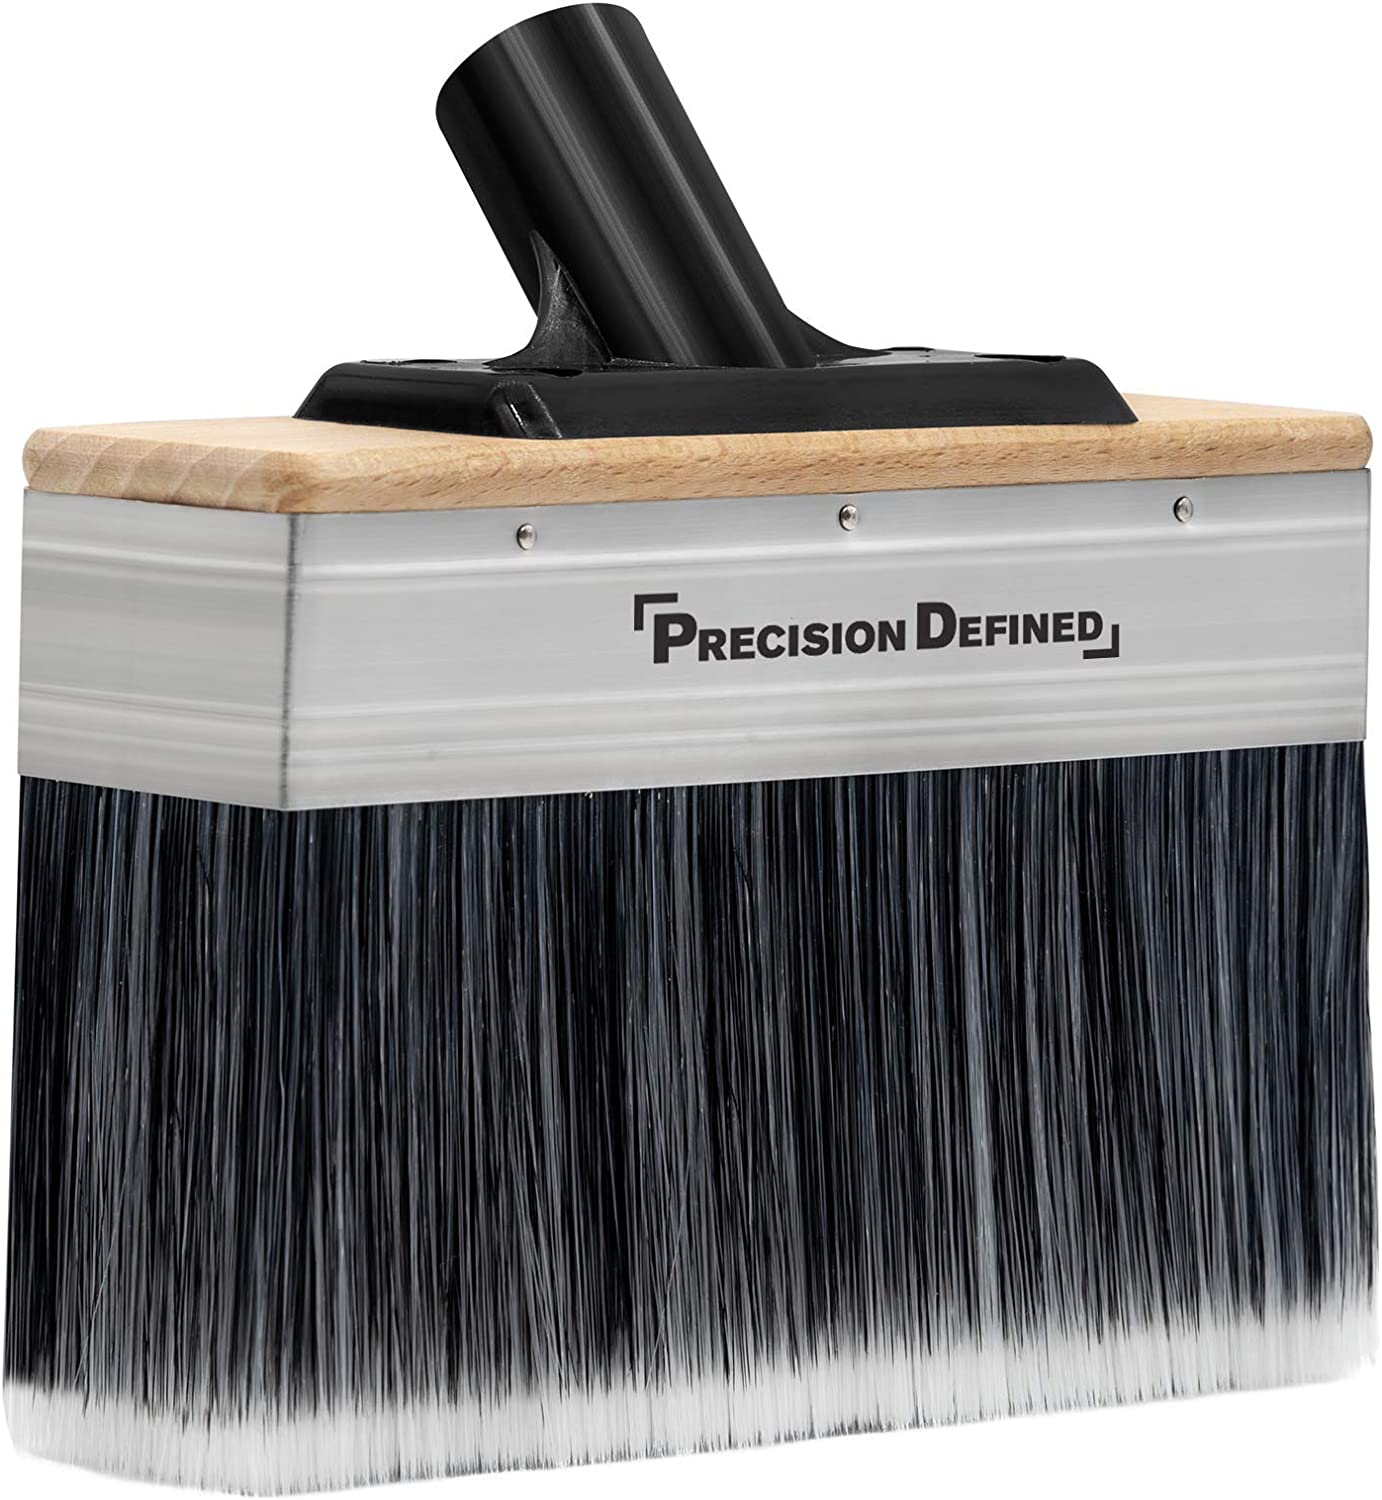 Precision Defined Deck Stain Brush | Large 7, 7.3 x 7.1 x 2.8 inches